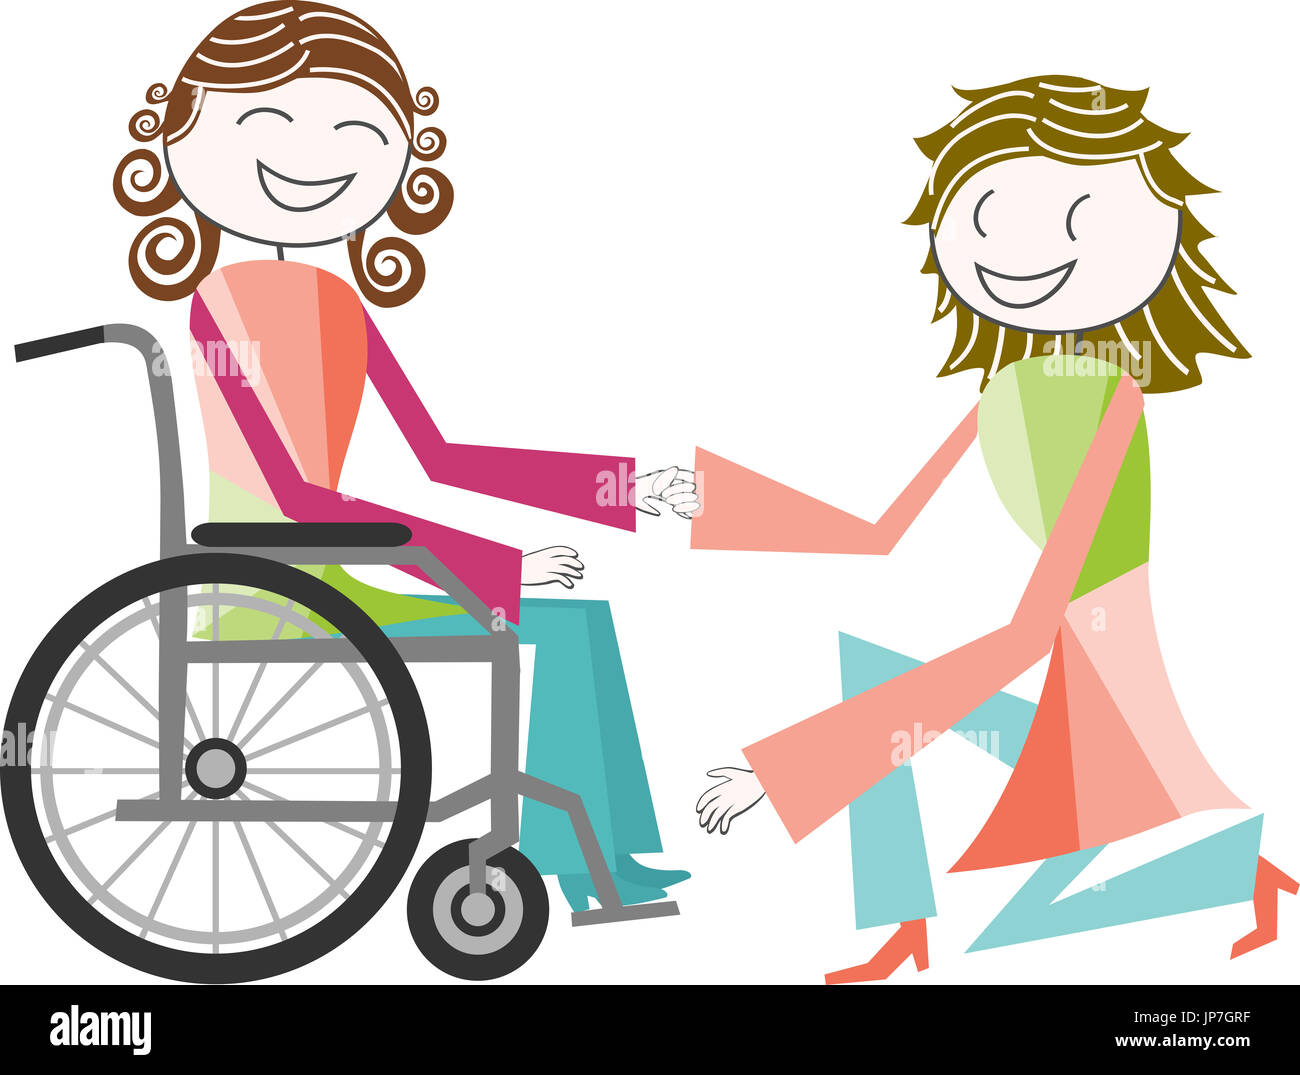 A disabled person in a wheelchair is assisted by a person, friend or caregiver Stock Photo